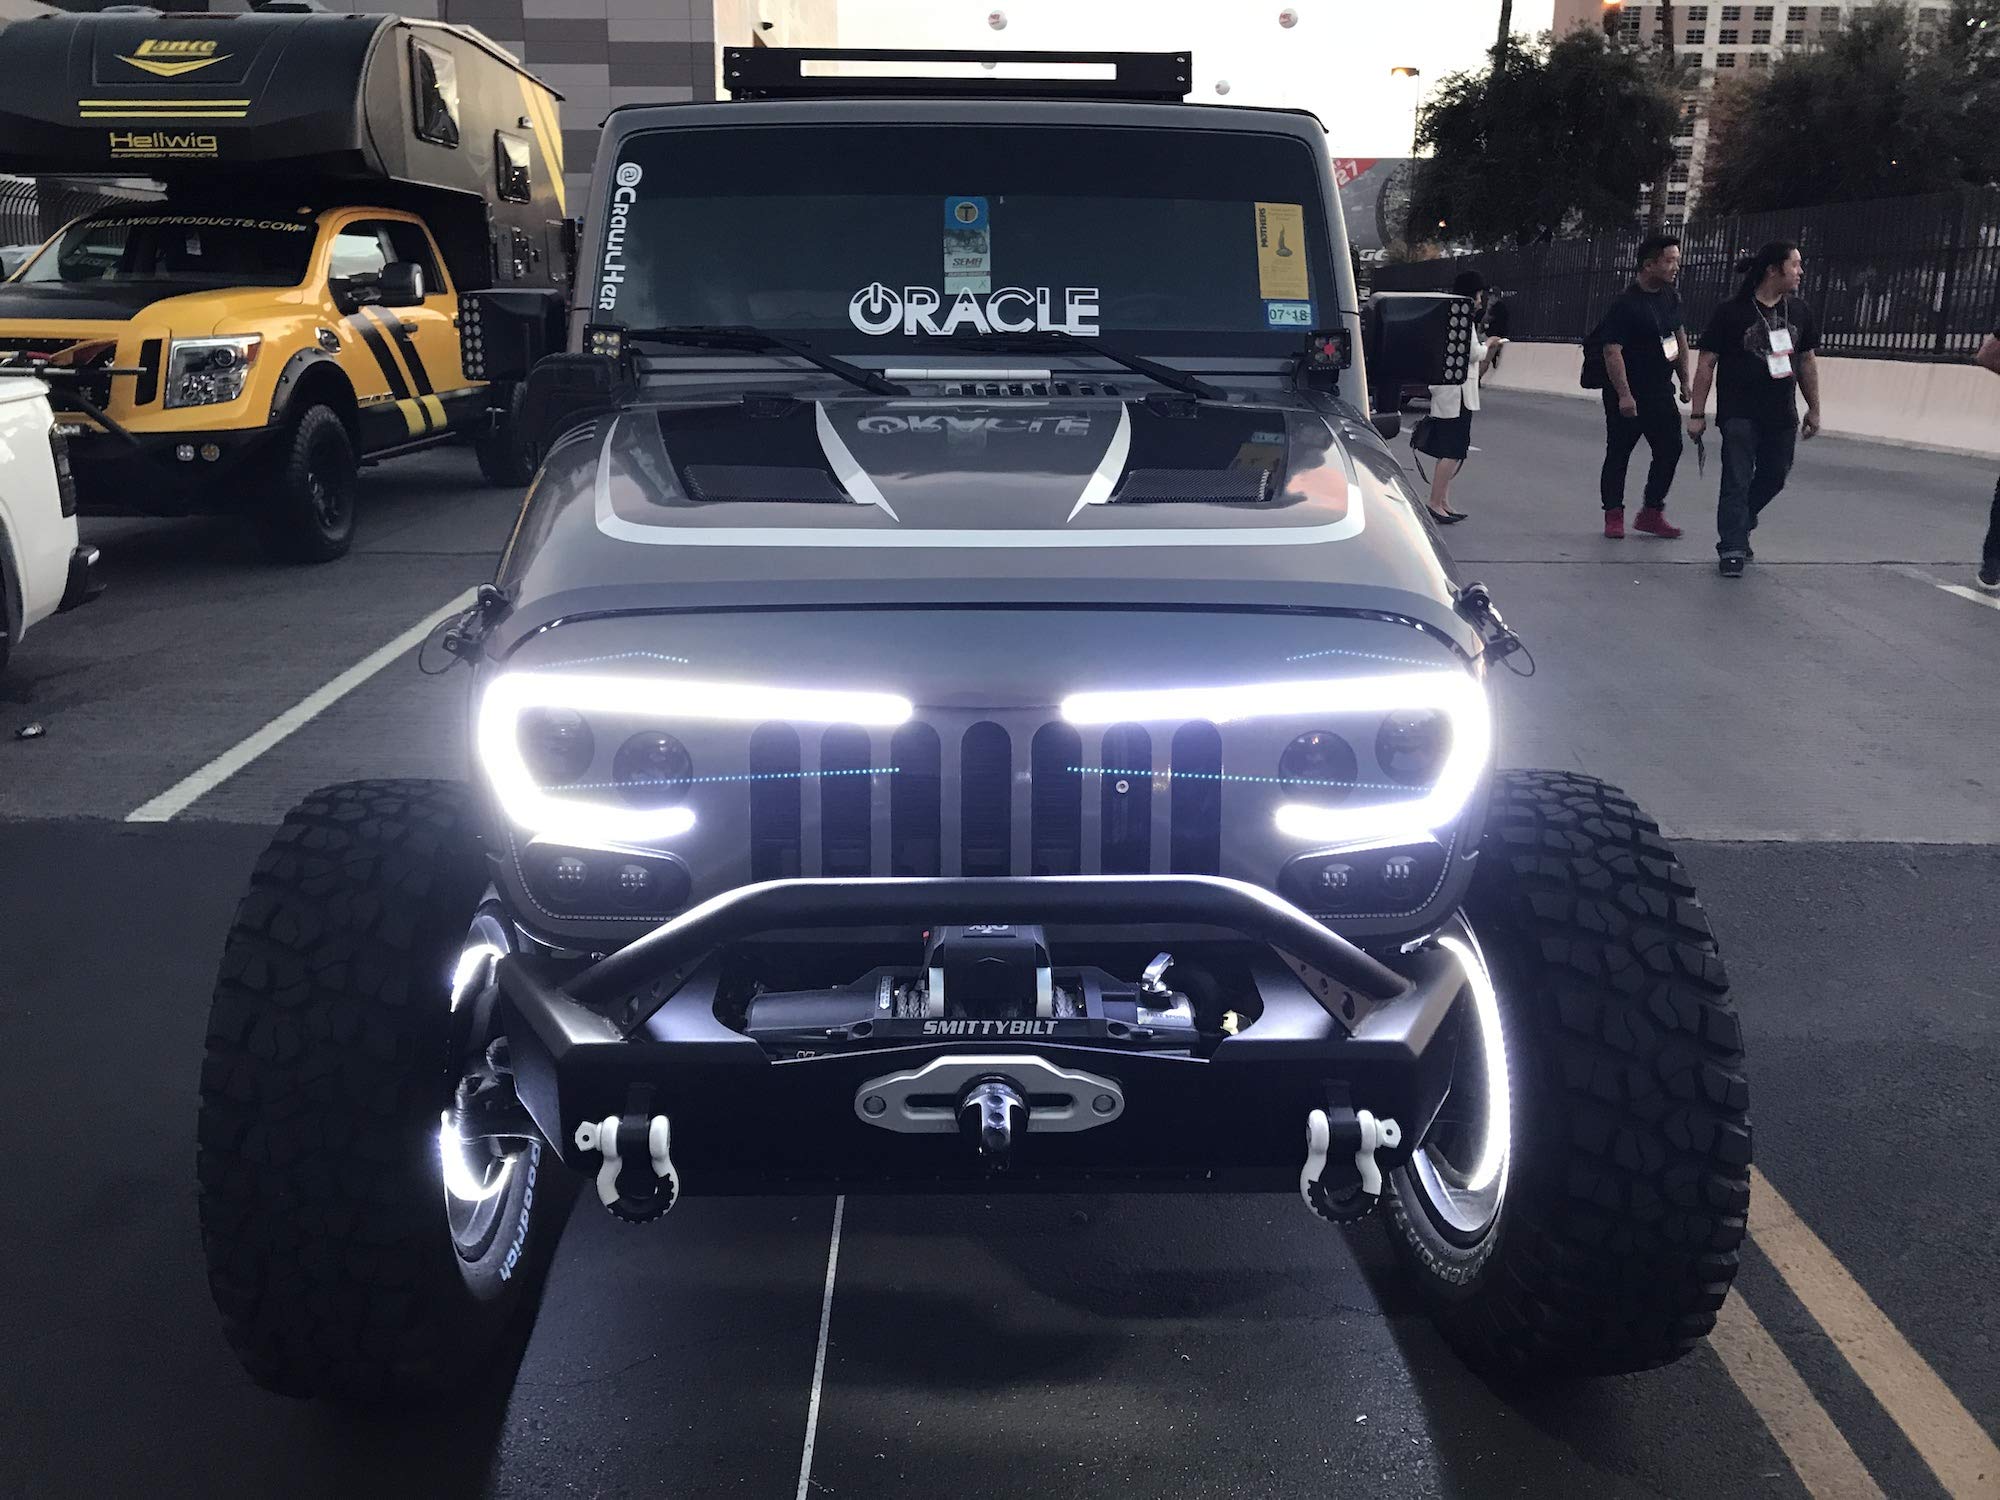 Oracle 5817-PRO VECTOR™ Series Full LED Grill for the 2007-2018 Jeep Wrangler JK